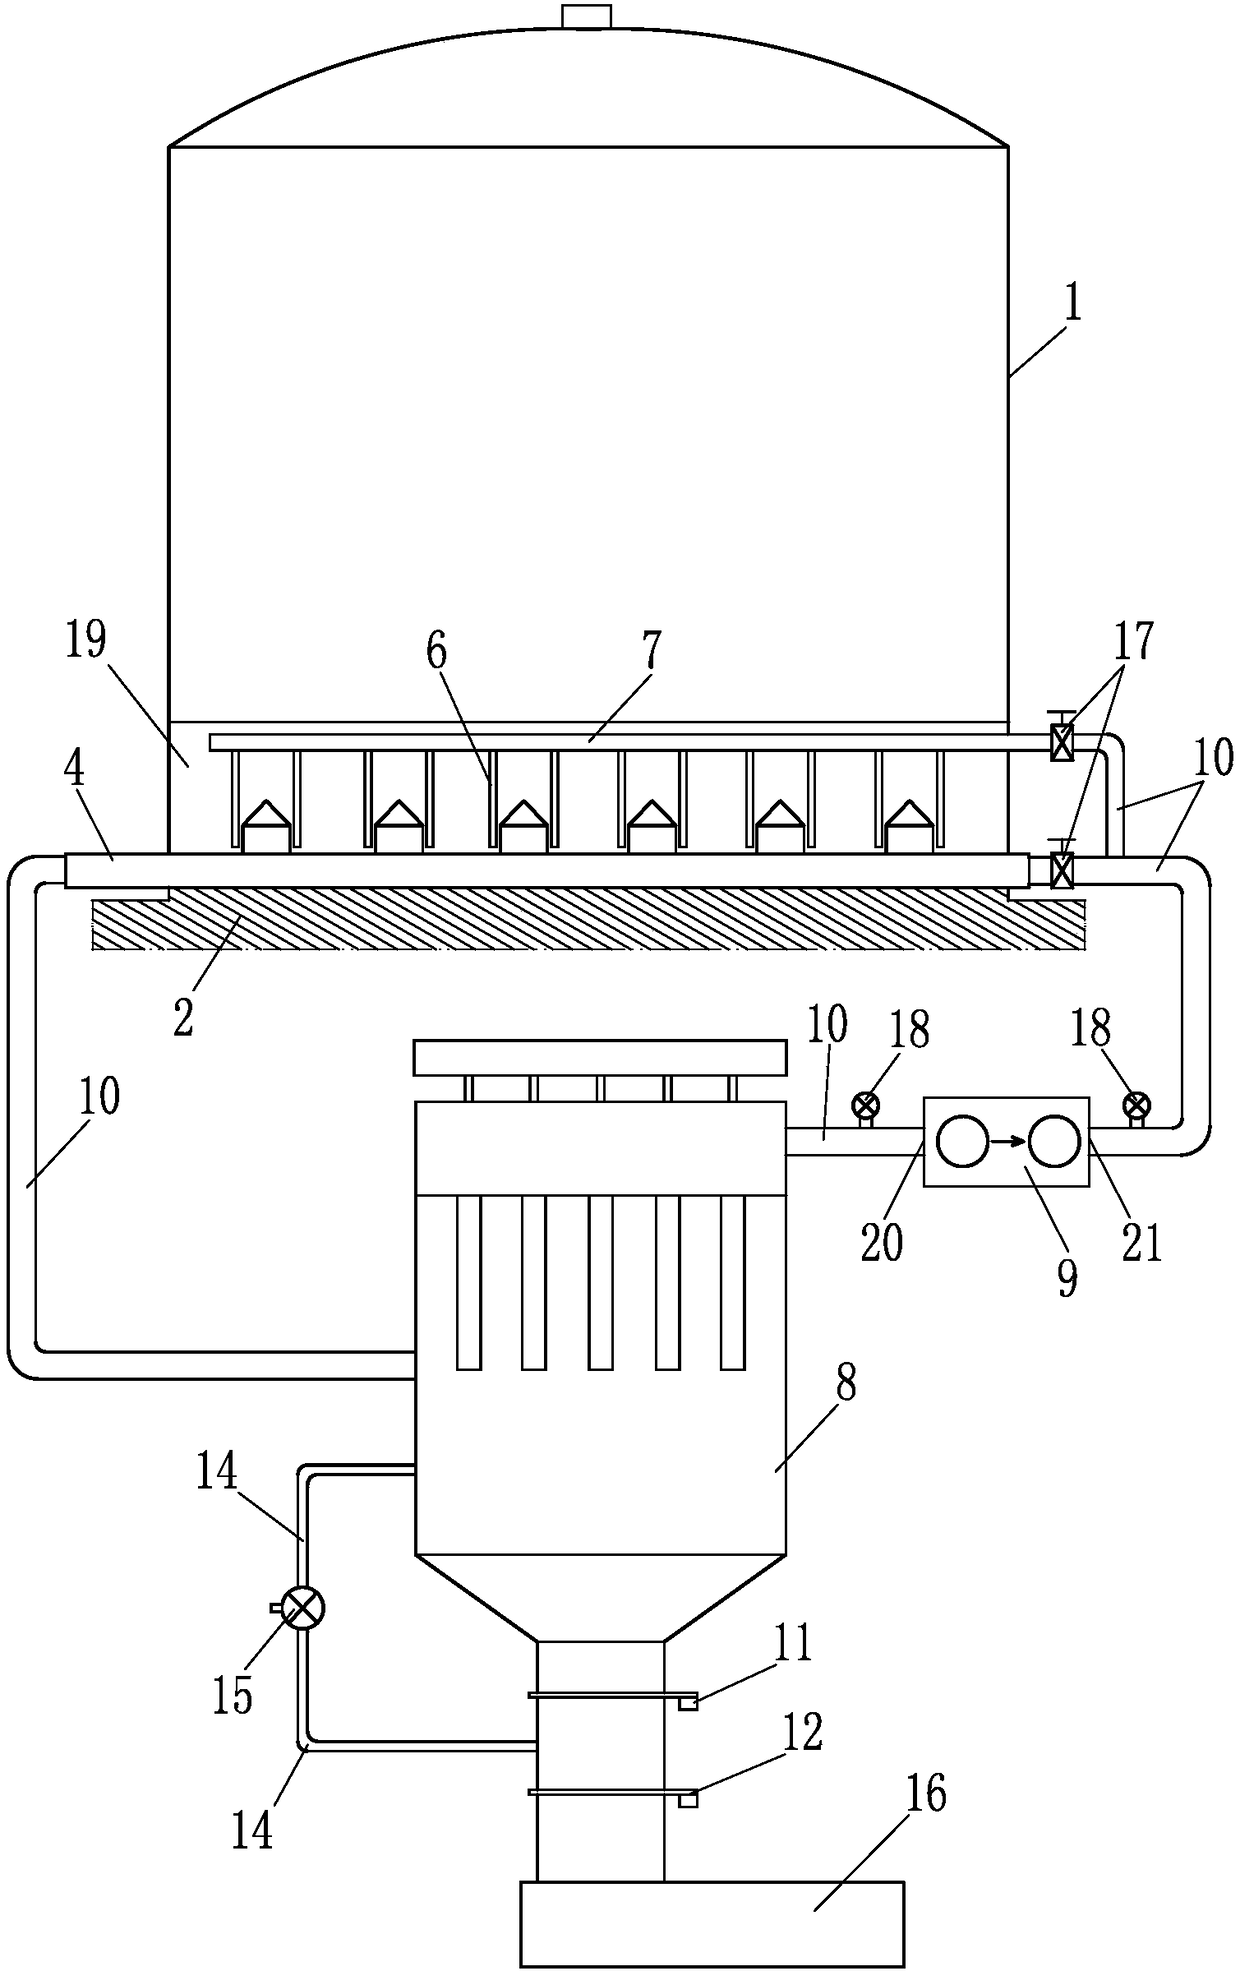 Powder storage warehouse provided with auxiliary discharging device